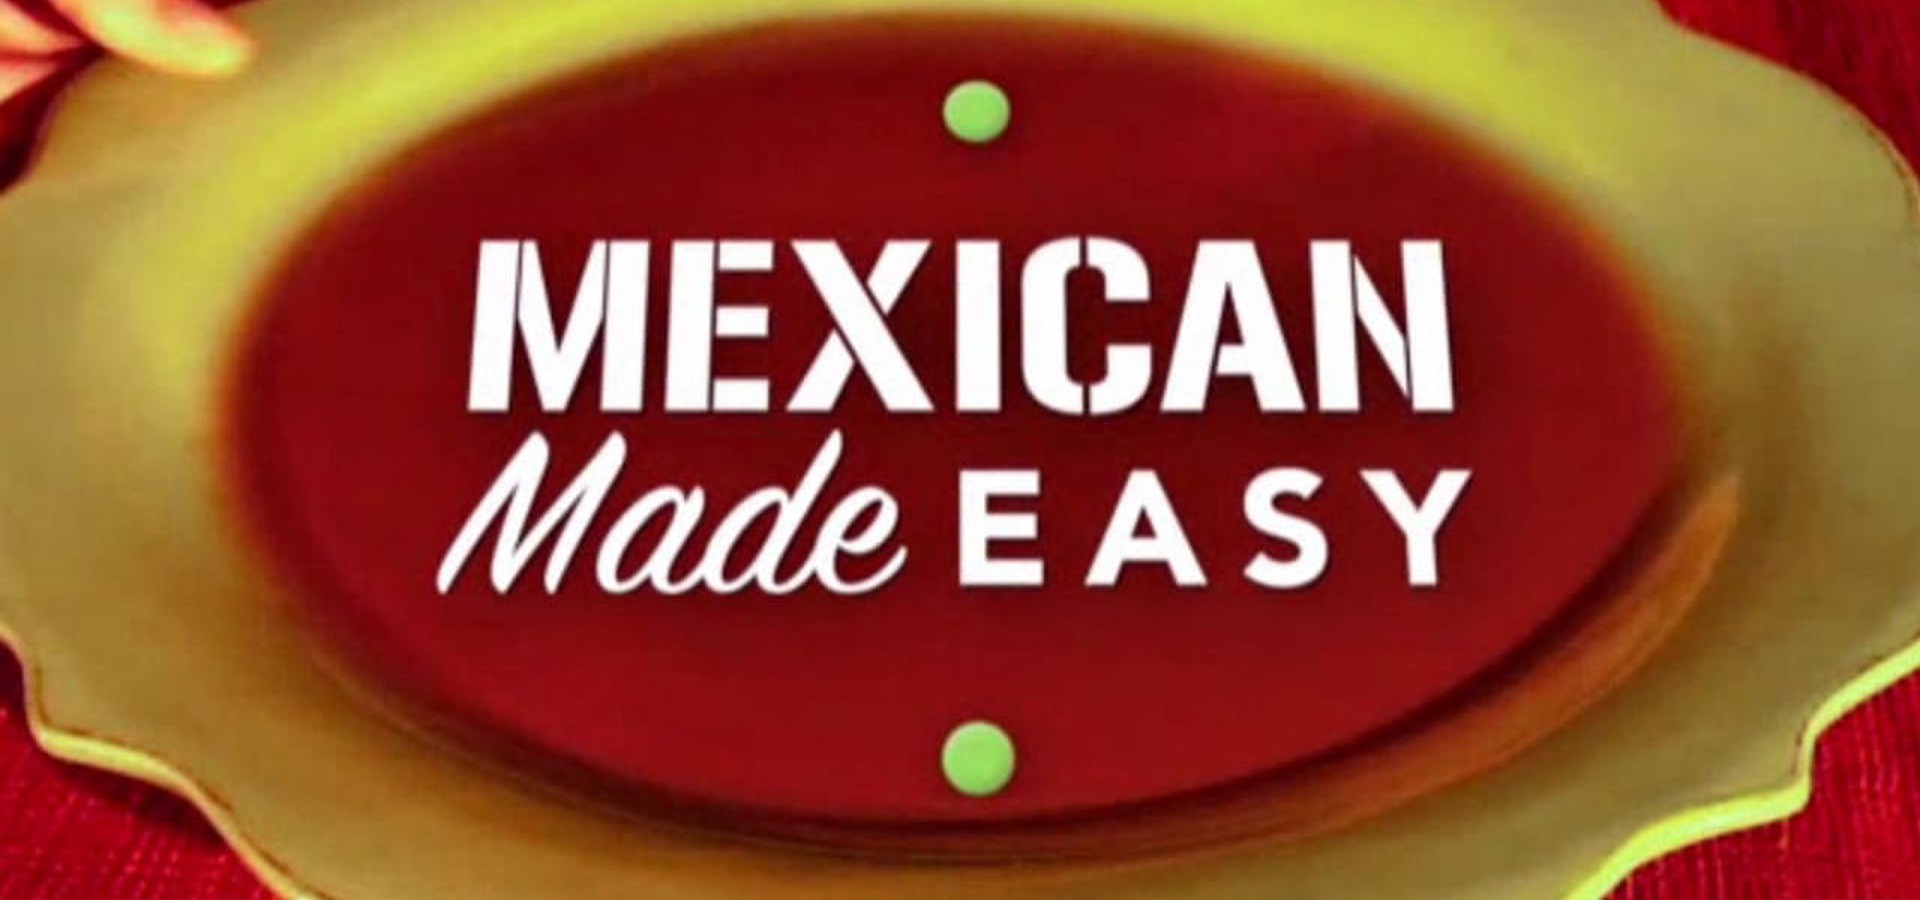 Mexican Made Easy